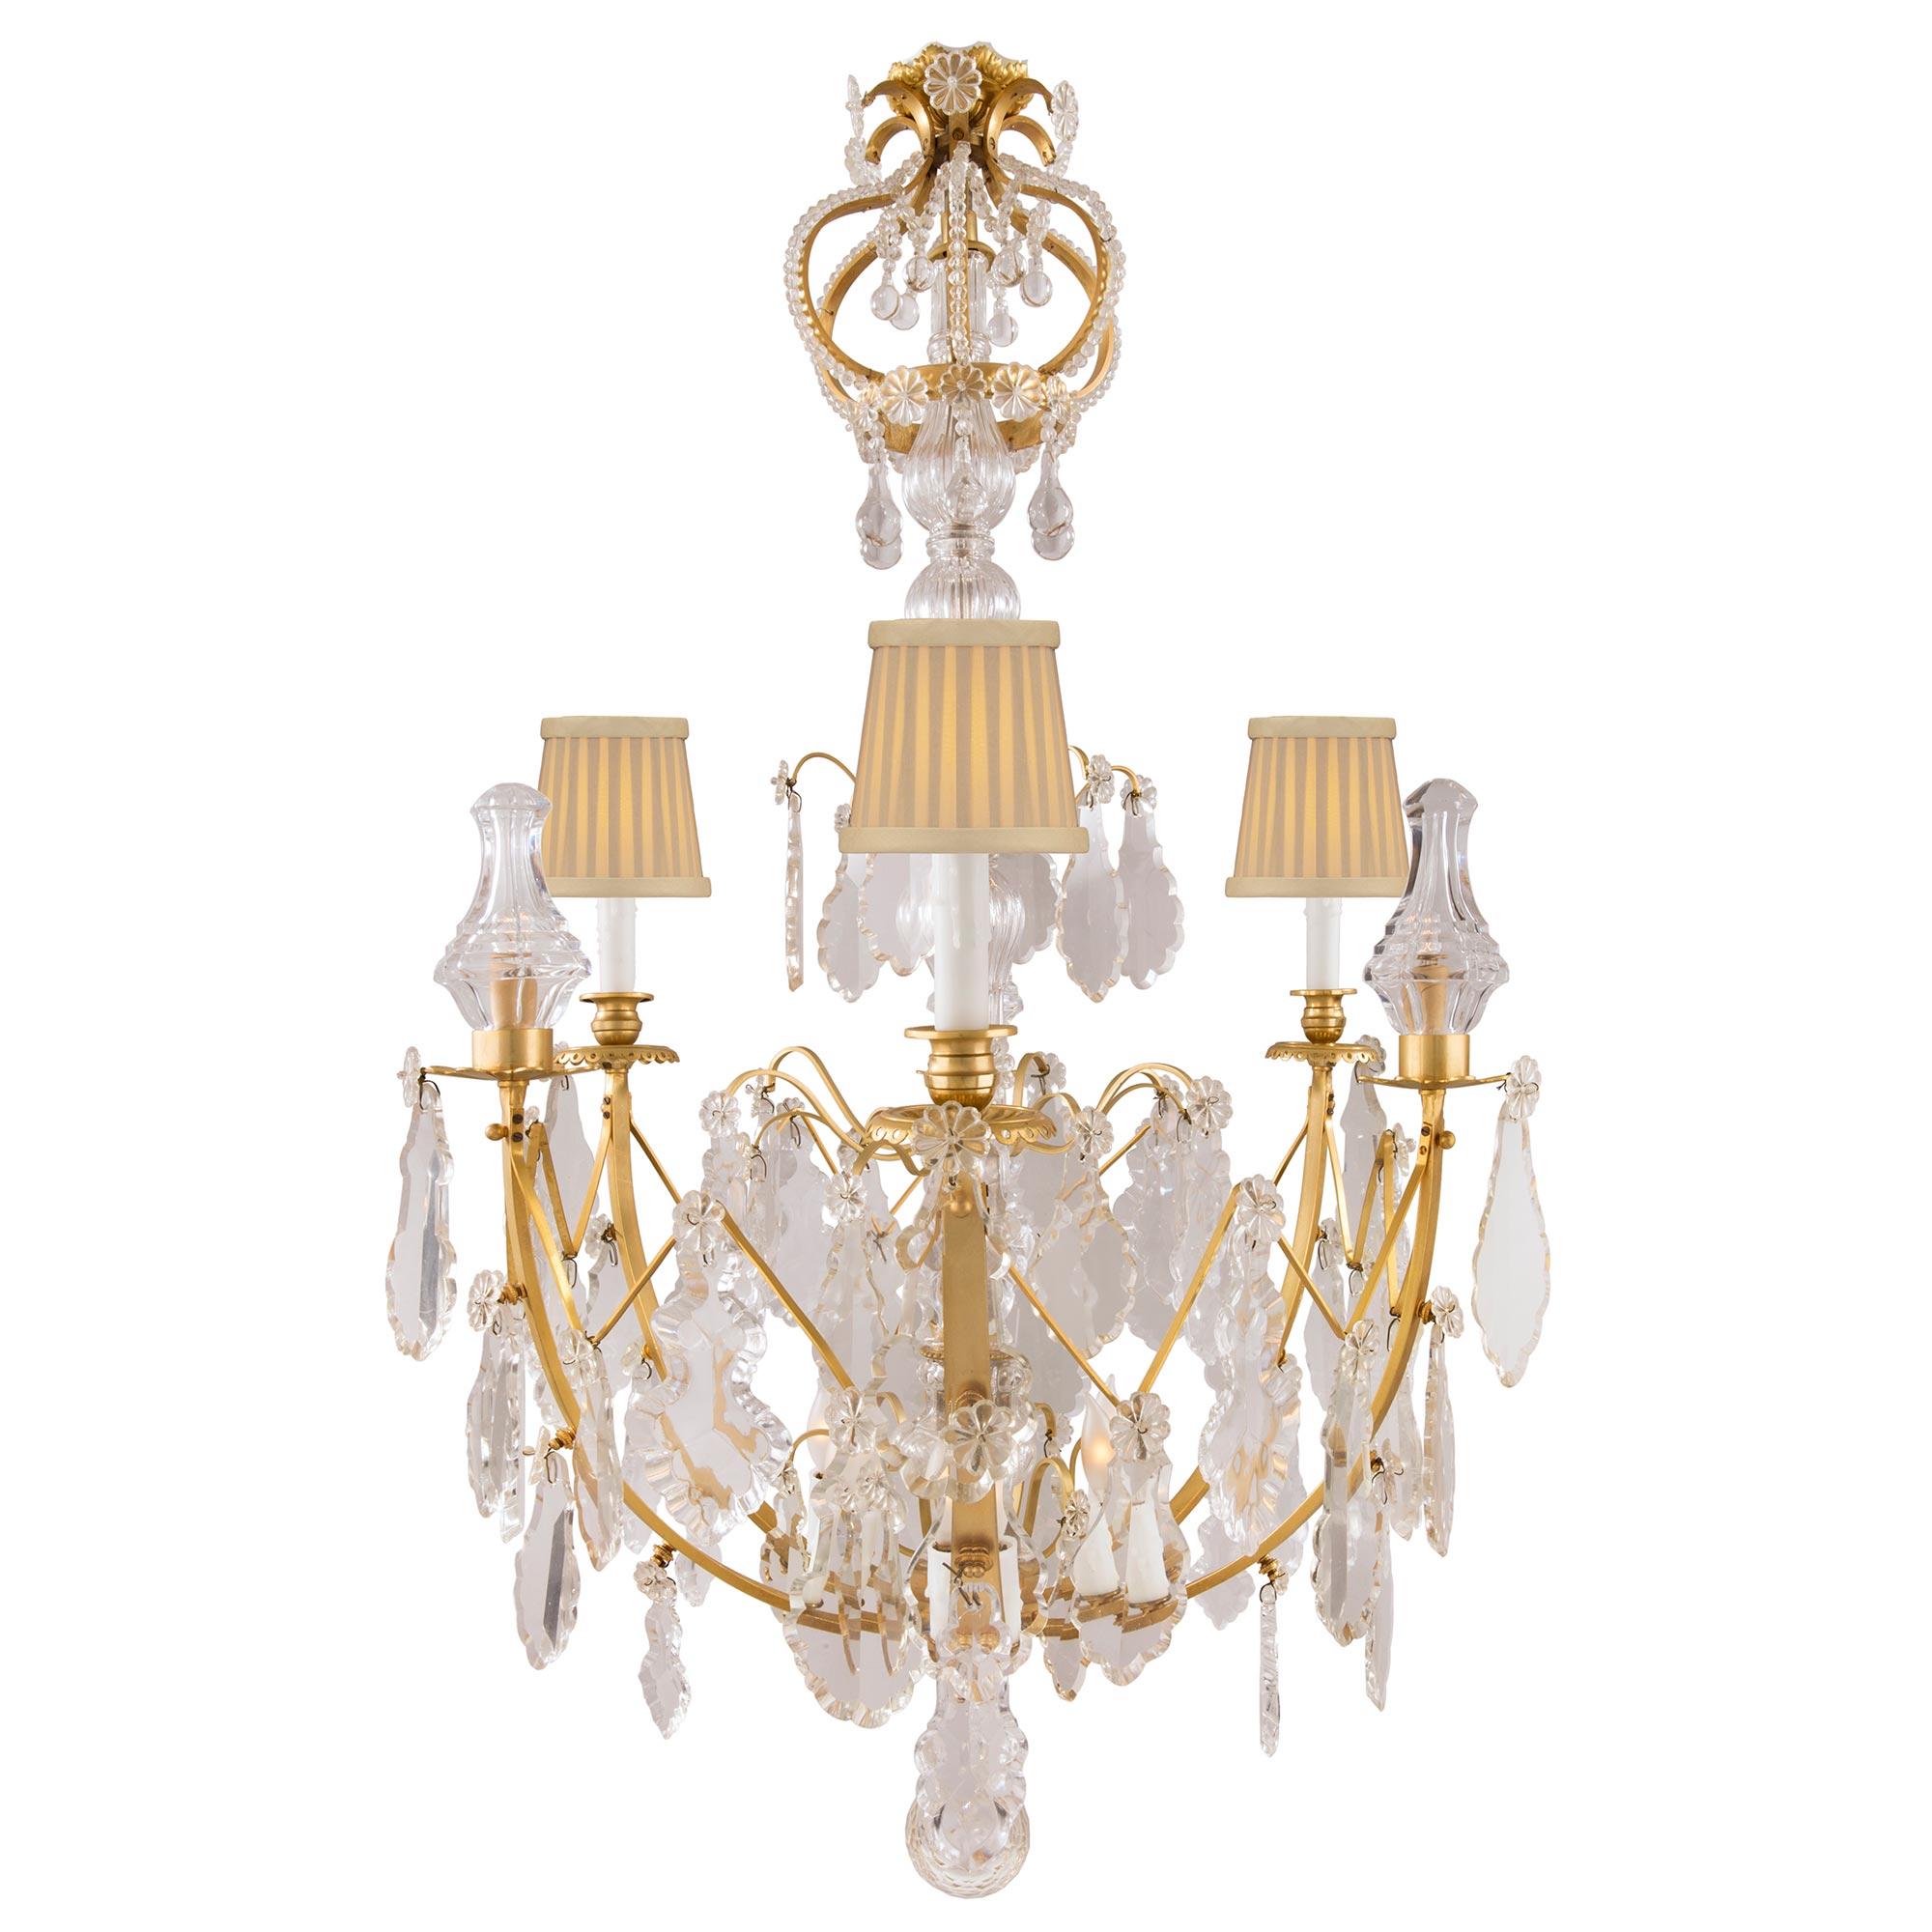 A fine French 19th century Louis XV st. ormolu and crystal twelve light chandelier. The chandelier is centered by an exceptional crystal fut with ormolu sprays and a lower crystal ball pendant. The ormolu arms are decorated with crystals pendants